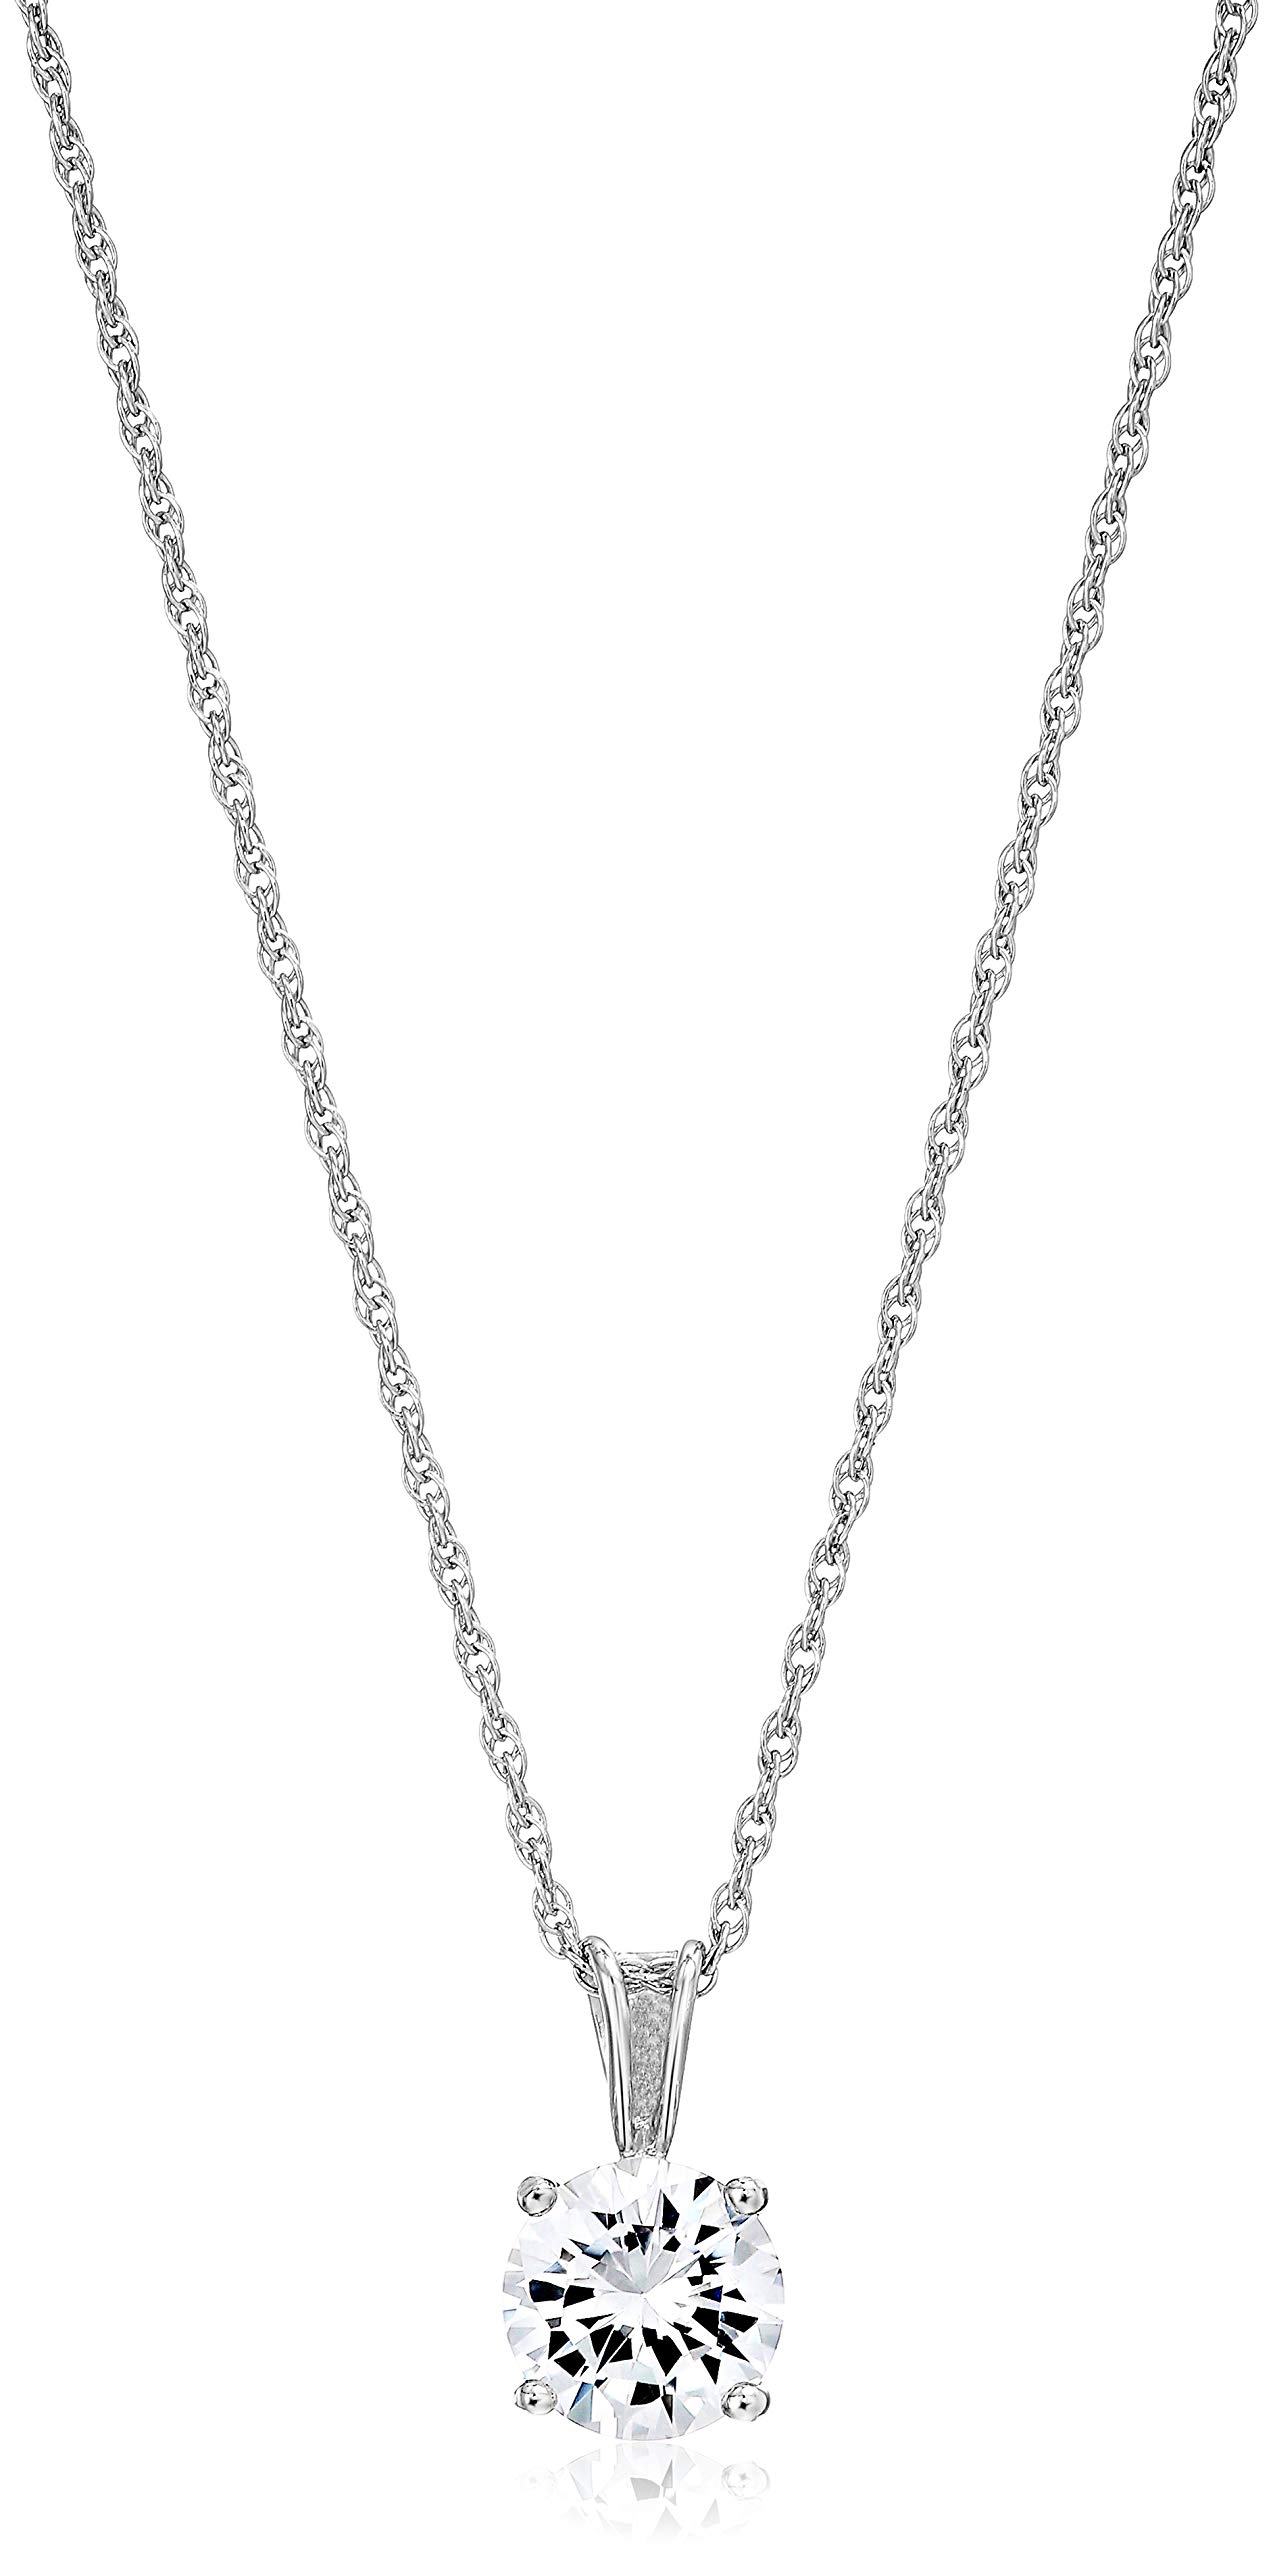 Amazon Essentials Plated Sterling Silver Cubic Zirconia Round Cut Solitaire Pendant Necklace, 18